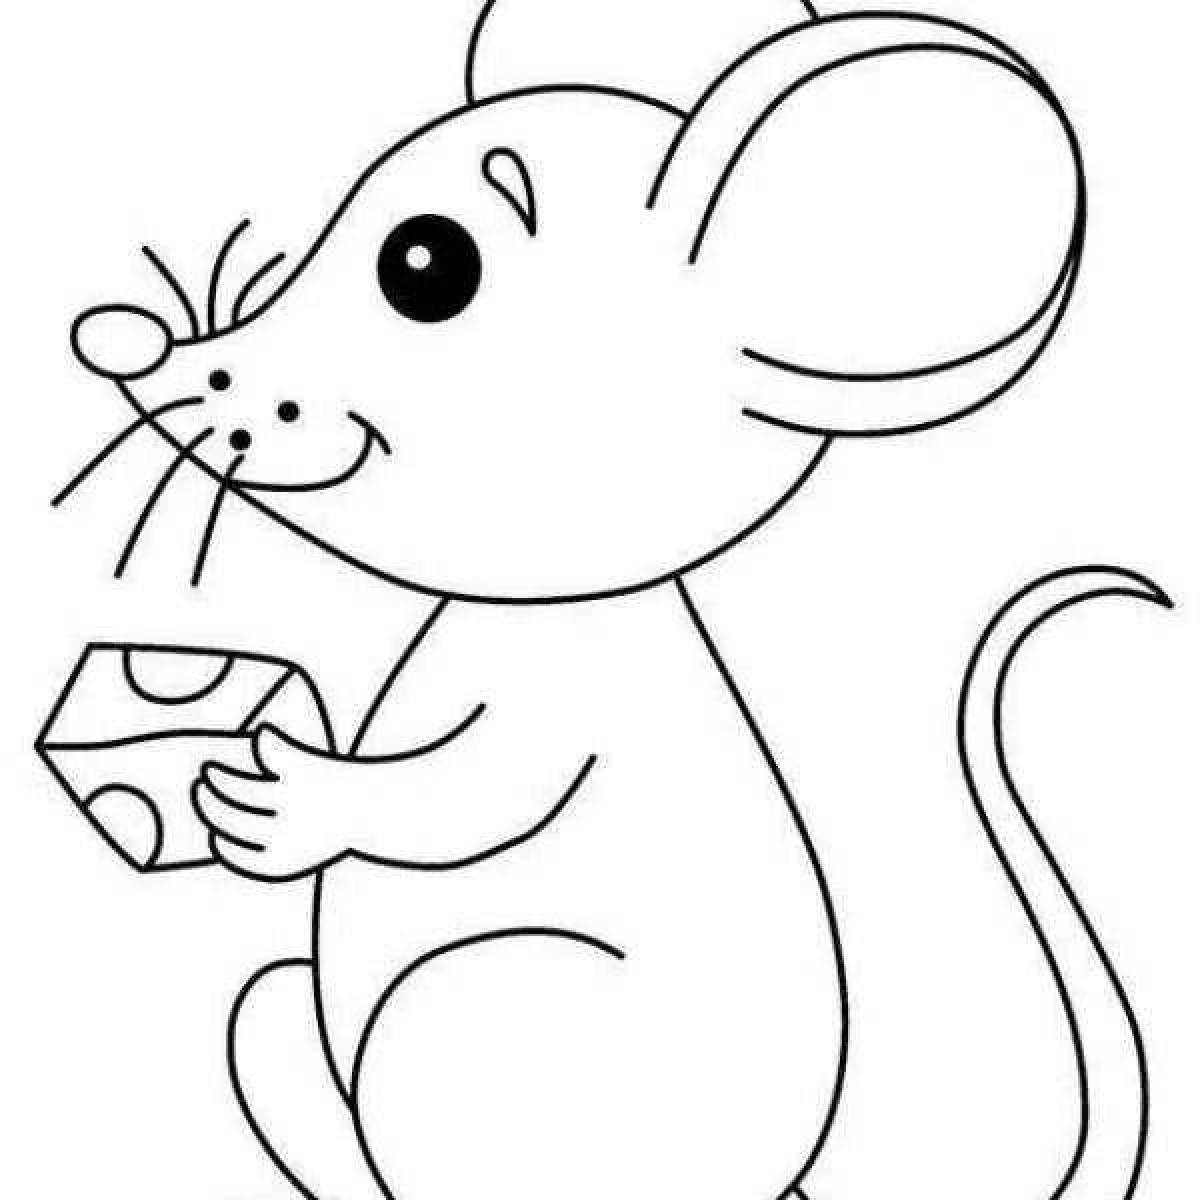 Fairy rat coloring book for kids